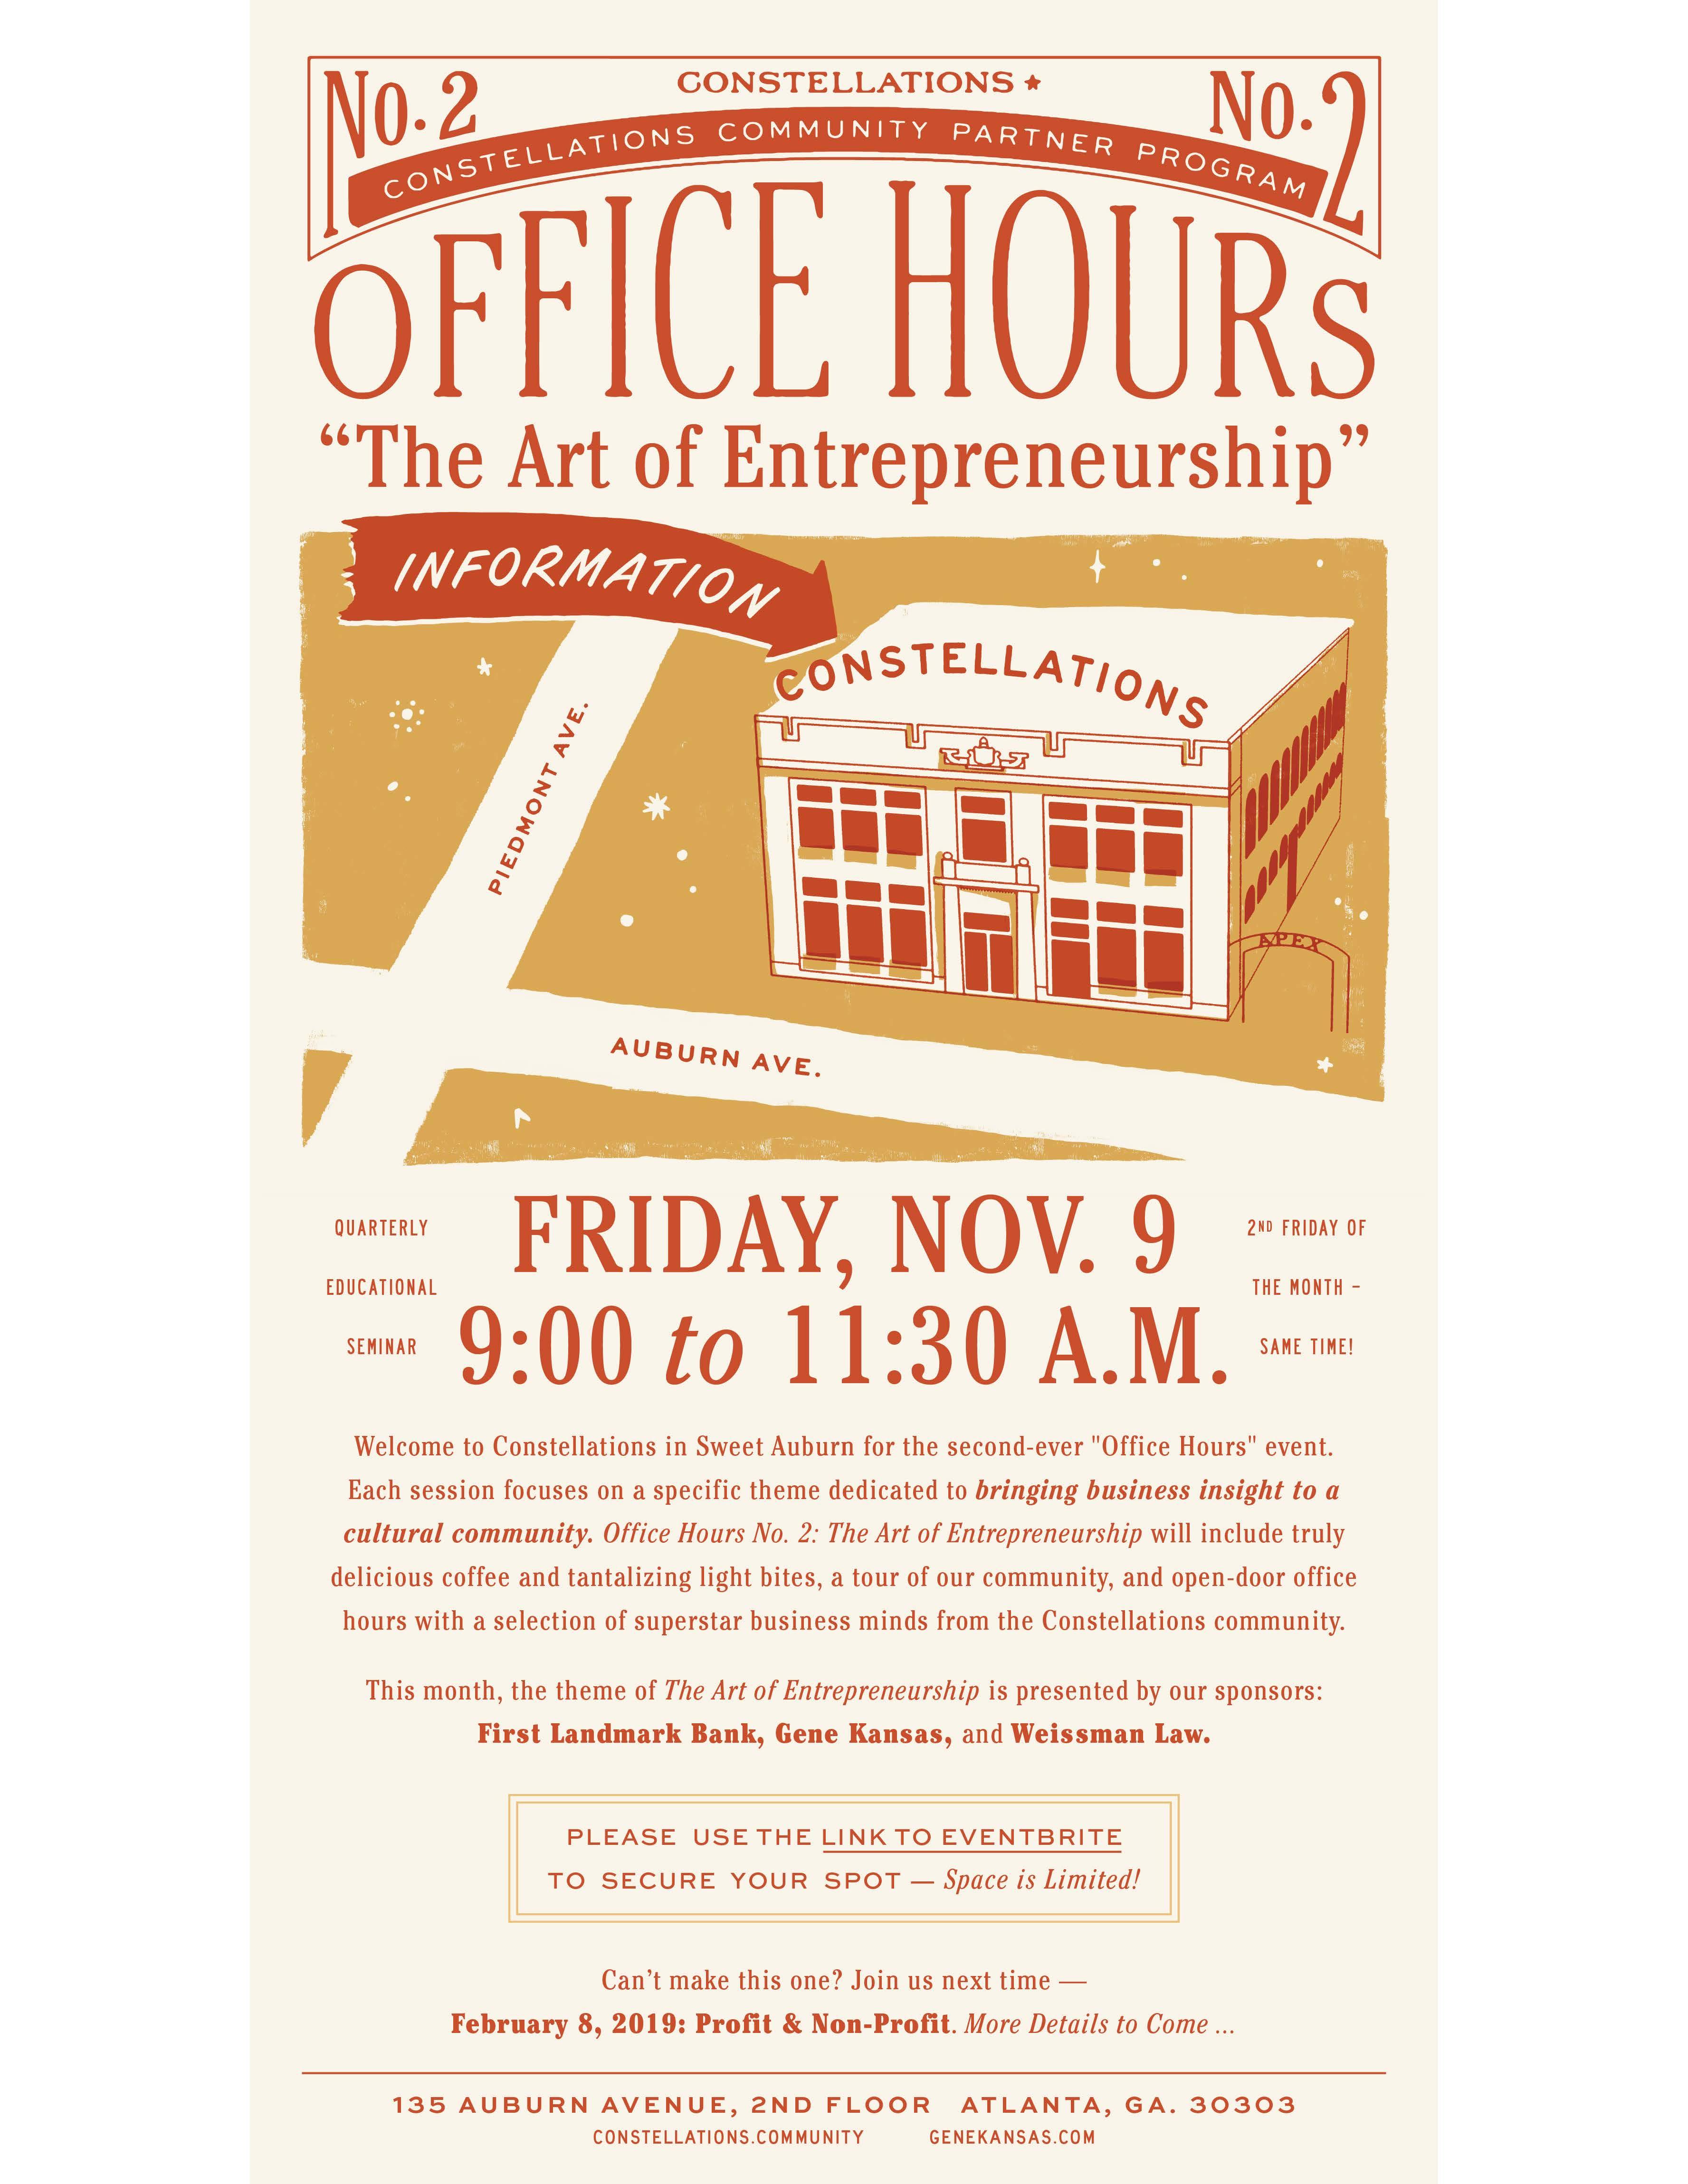 Constellations Community Office Hours Flyer